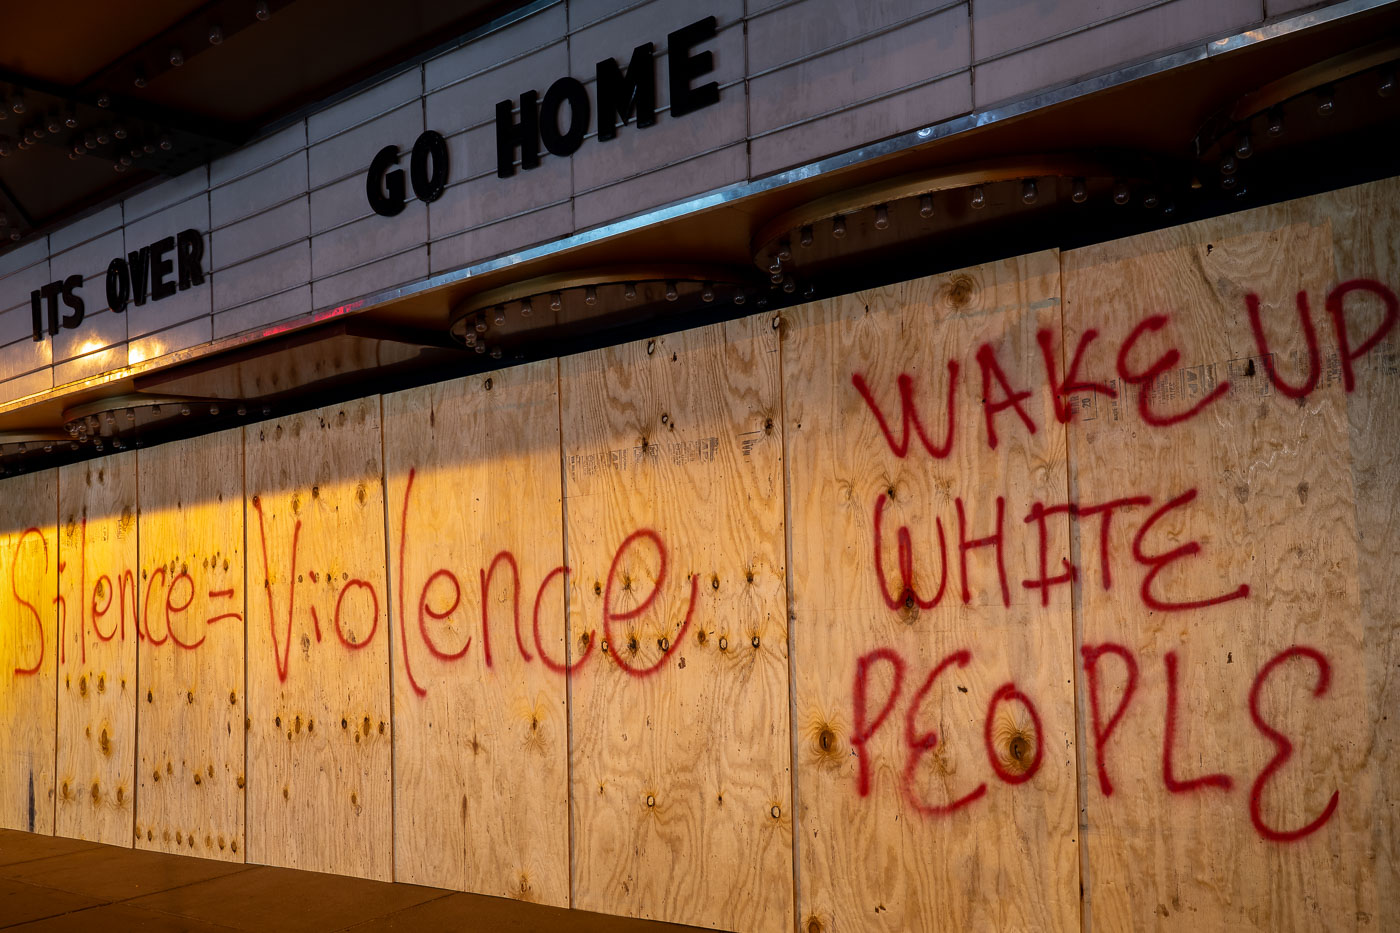 Uptown theater boards that read silence equals violence